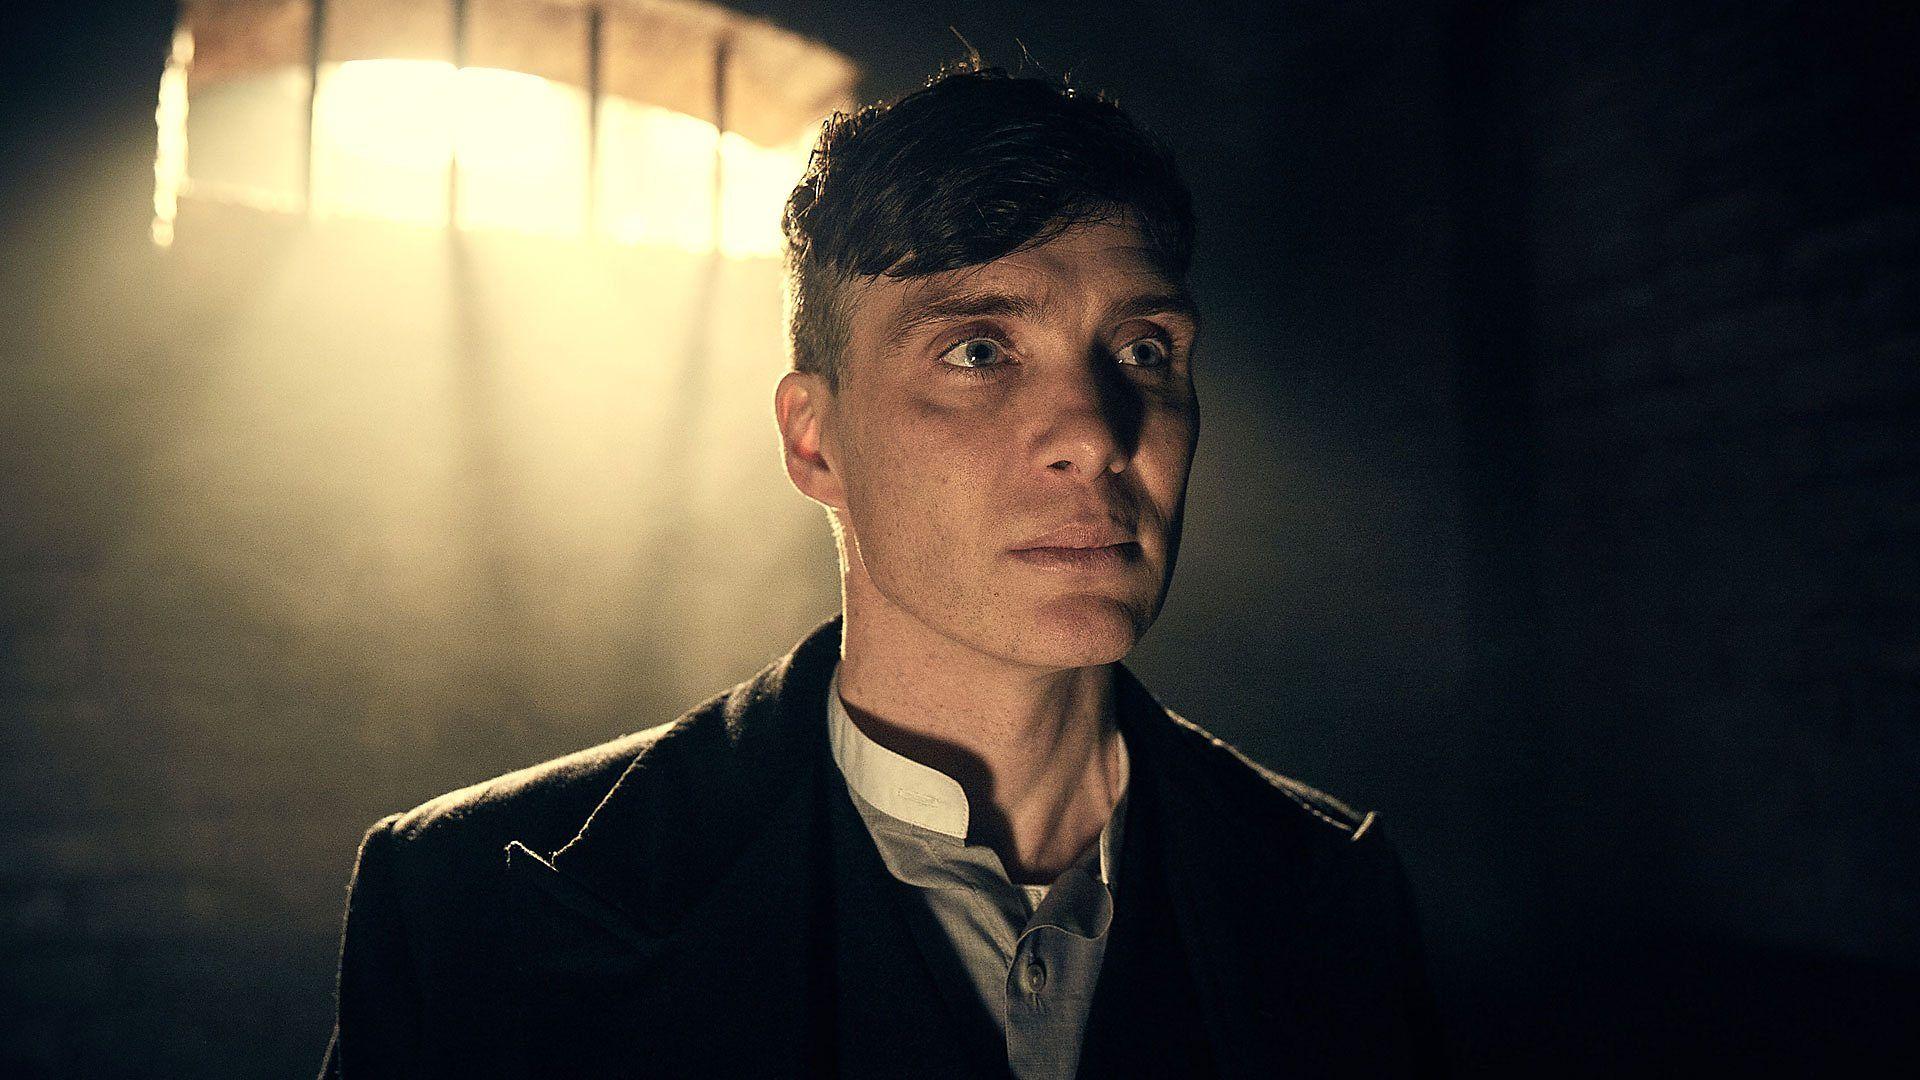 Wallpaper Peaky Blinders Art Thomas Tommy Shelby Art Peaky Blinders  Poster Painting Background  Download Free Image